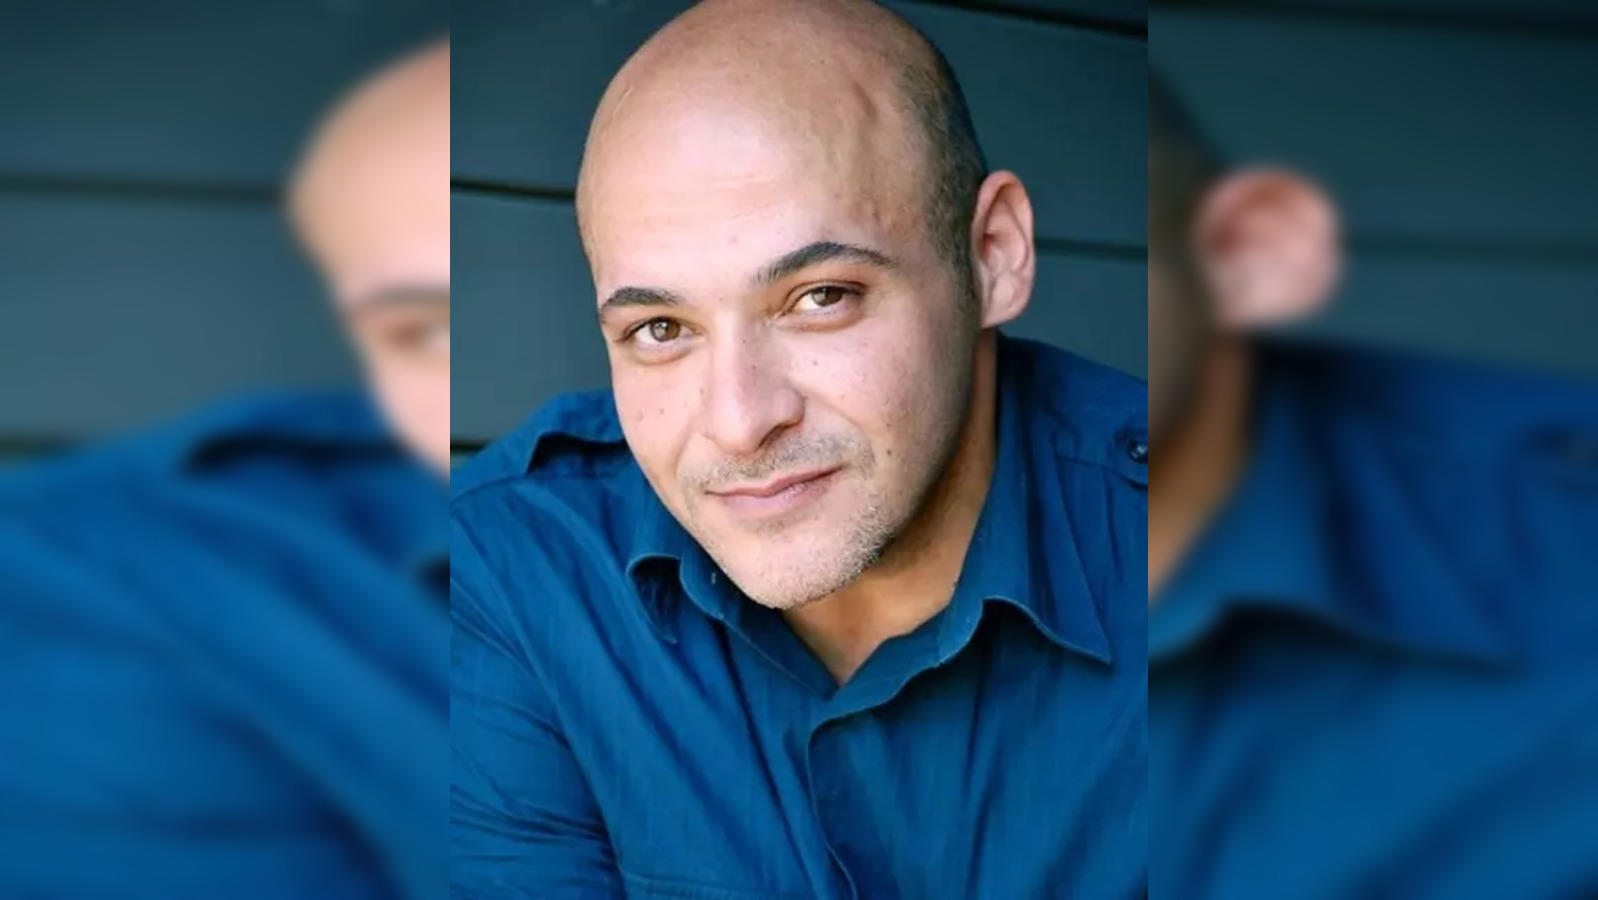 Breaking Bad' Actor Mike Batayeh Dead at 52